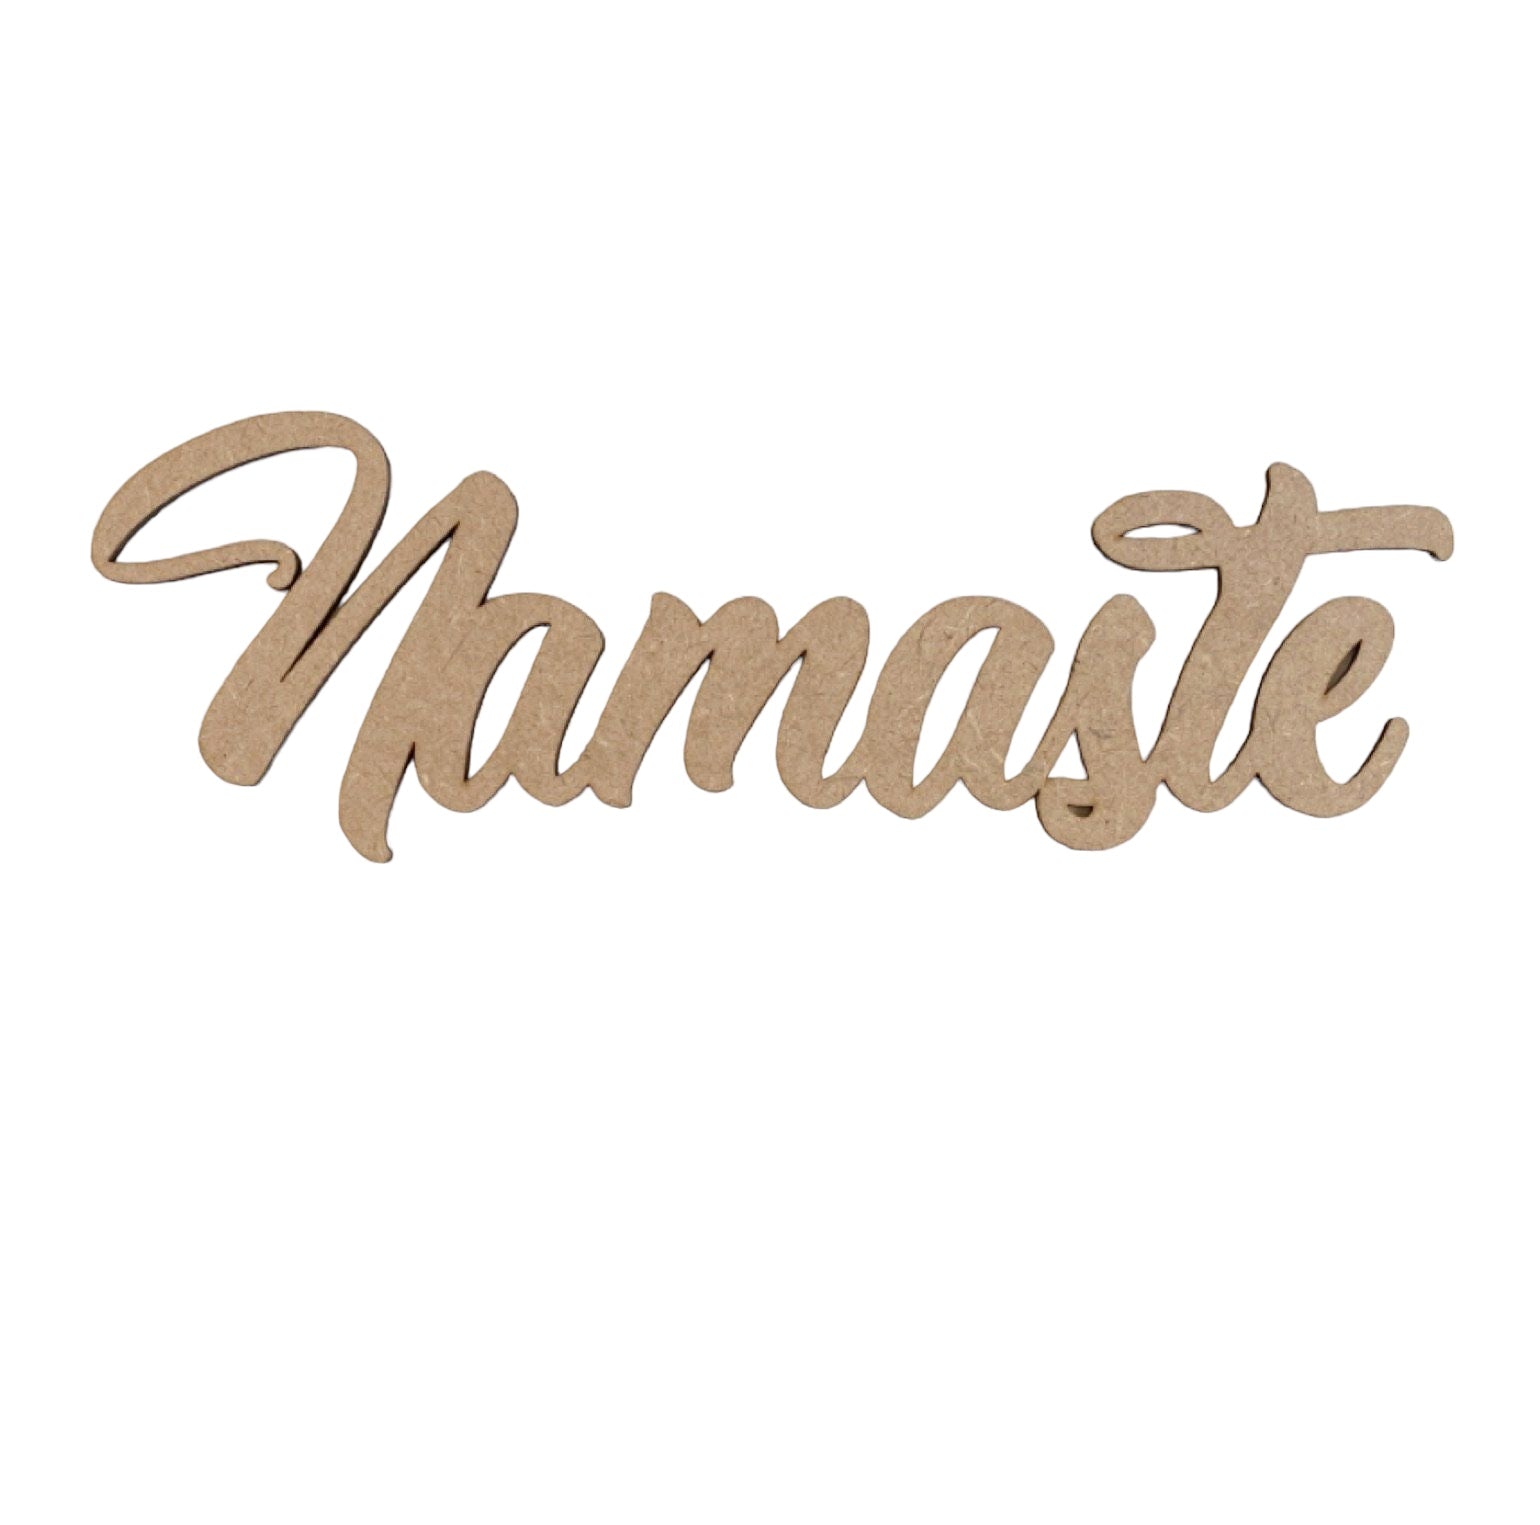 Namaste Word Wall Quote Art DIY Raw MDF Timber Wood - The Renmy Store Homewares & Gifts 